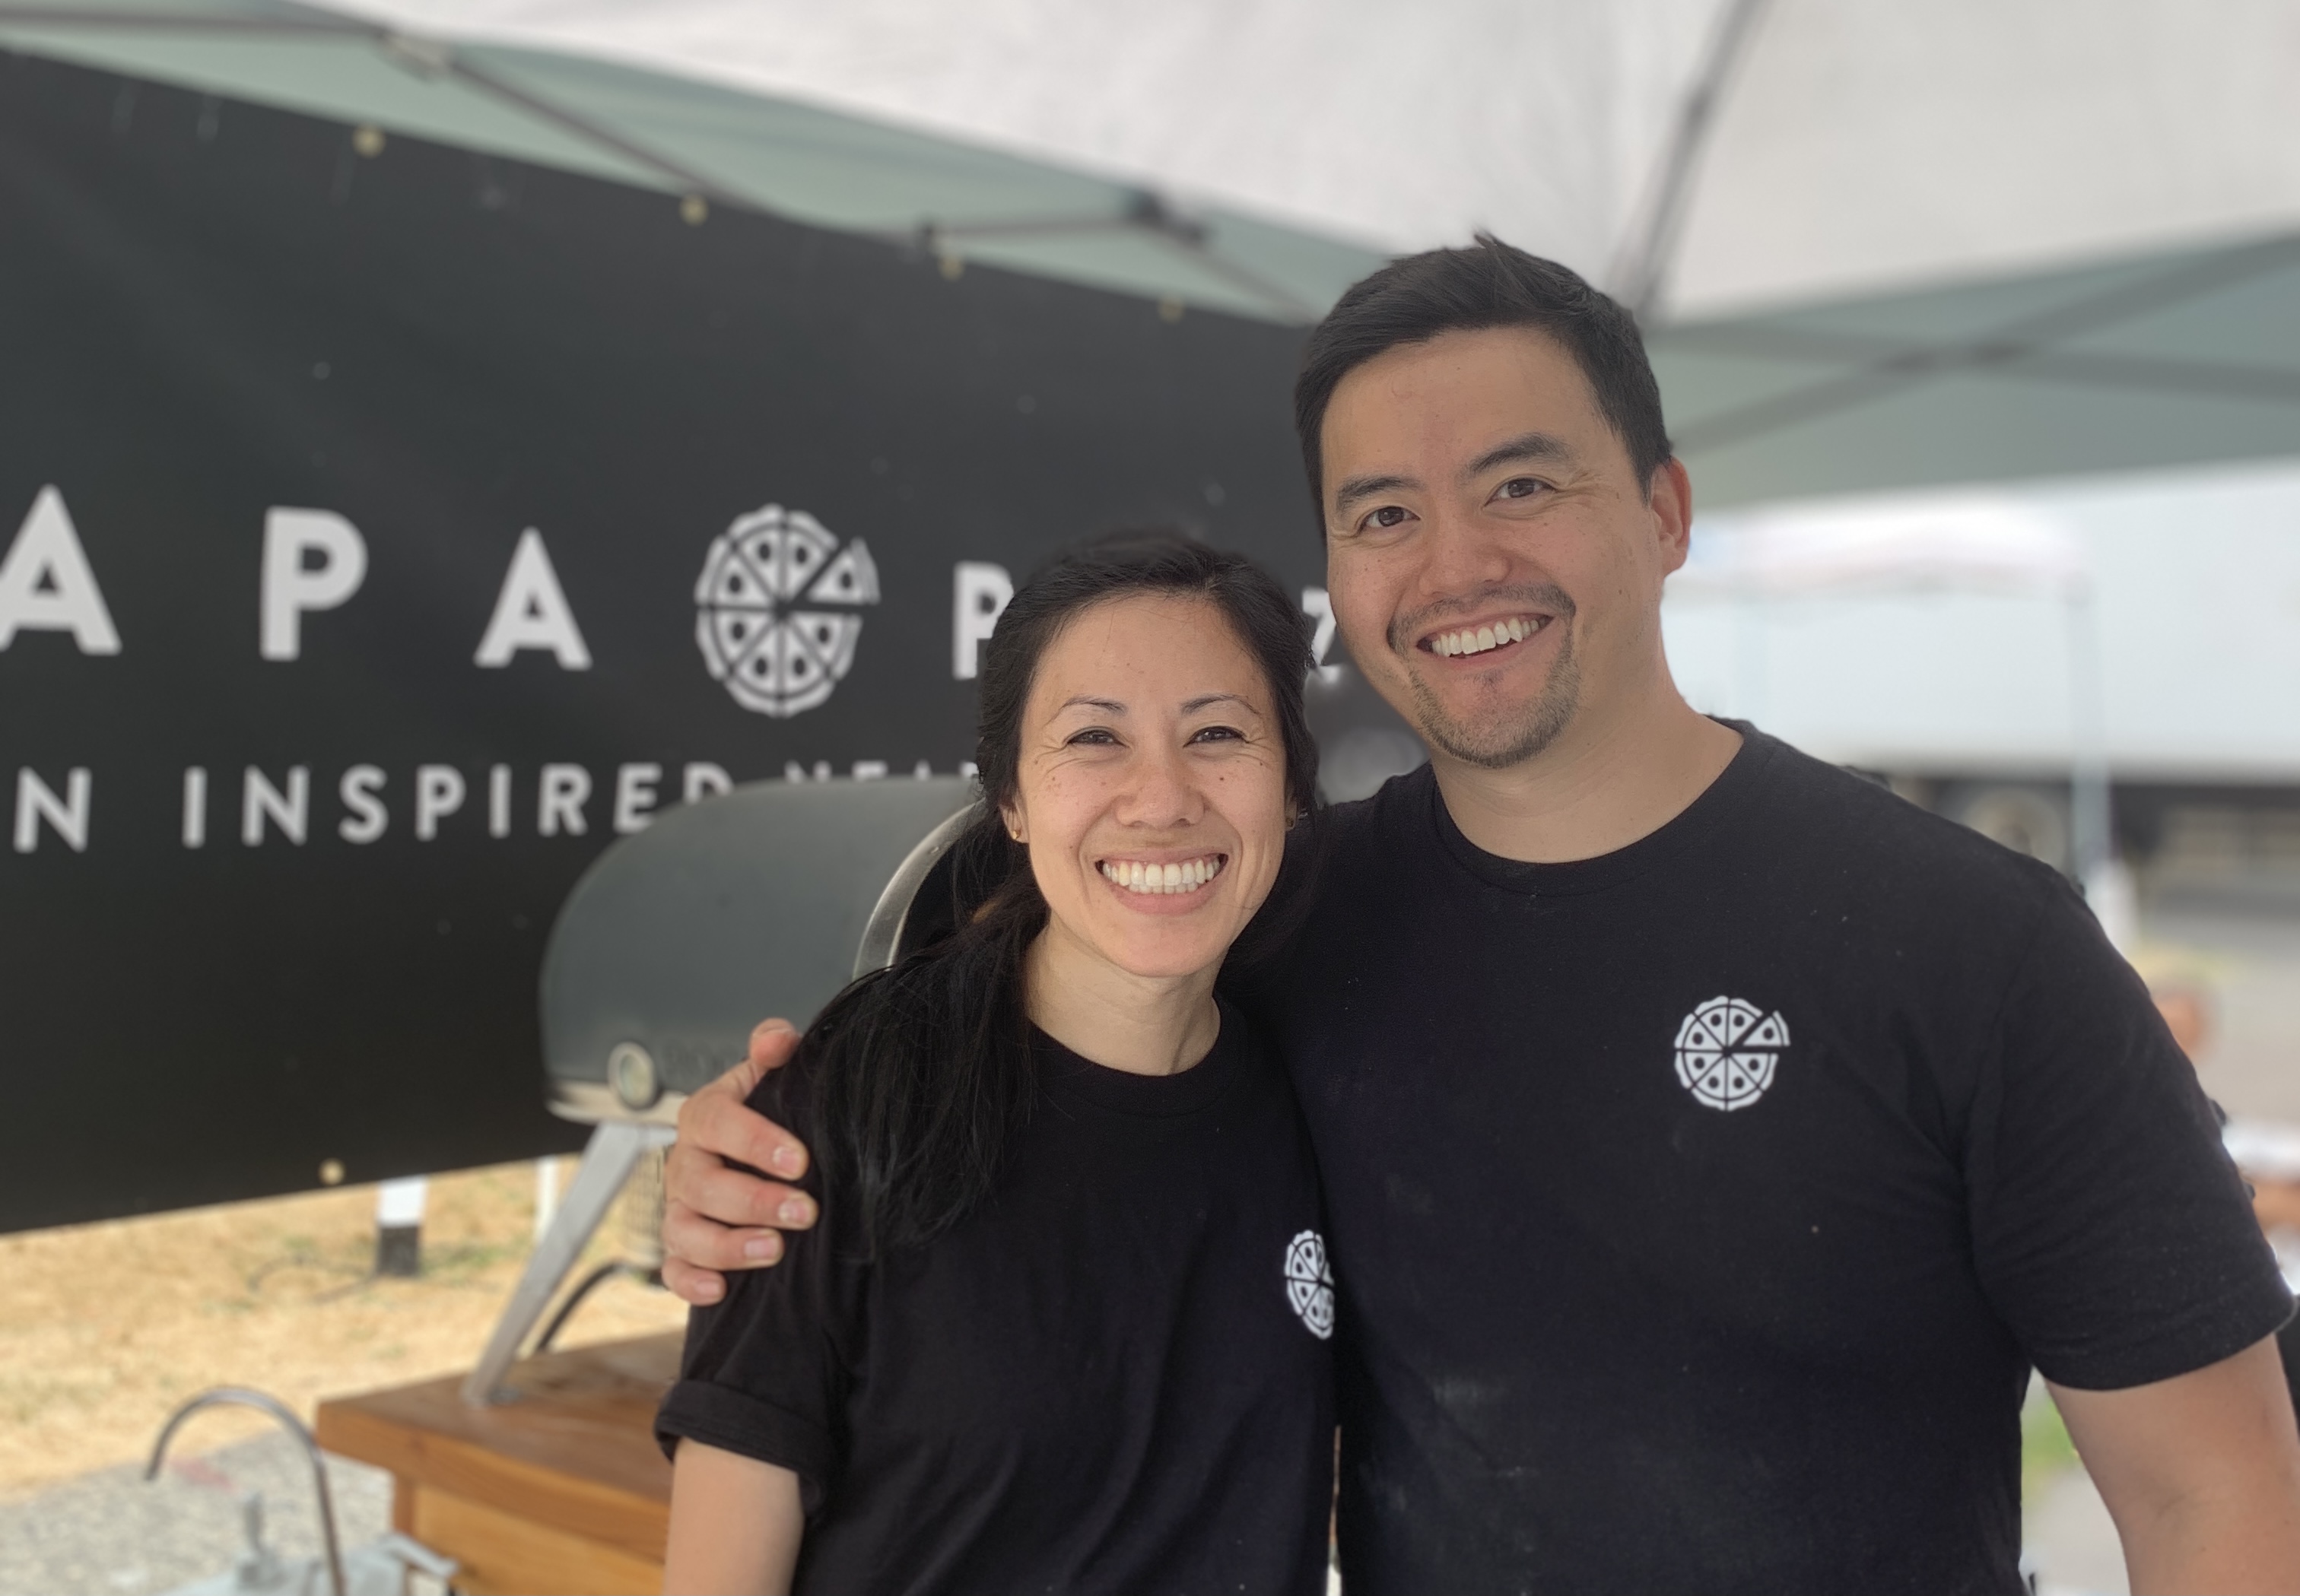 A man and a woman in black shirts stand at a food stall at a farmer’s market. They are the owners of Hapa Pizza.